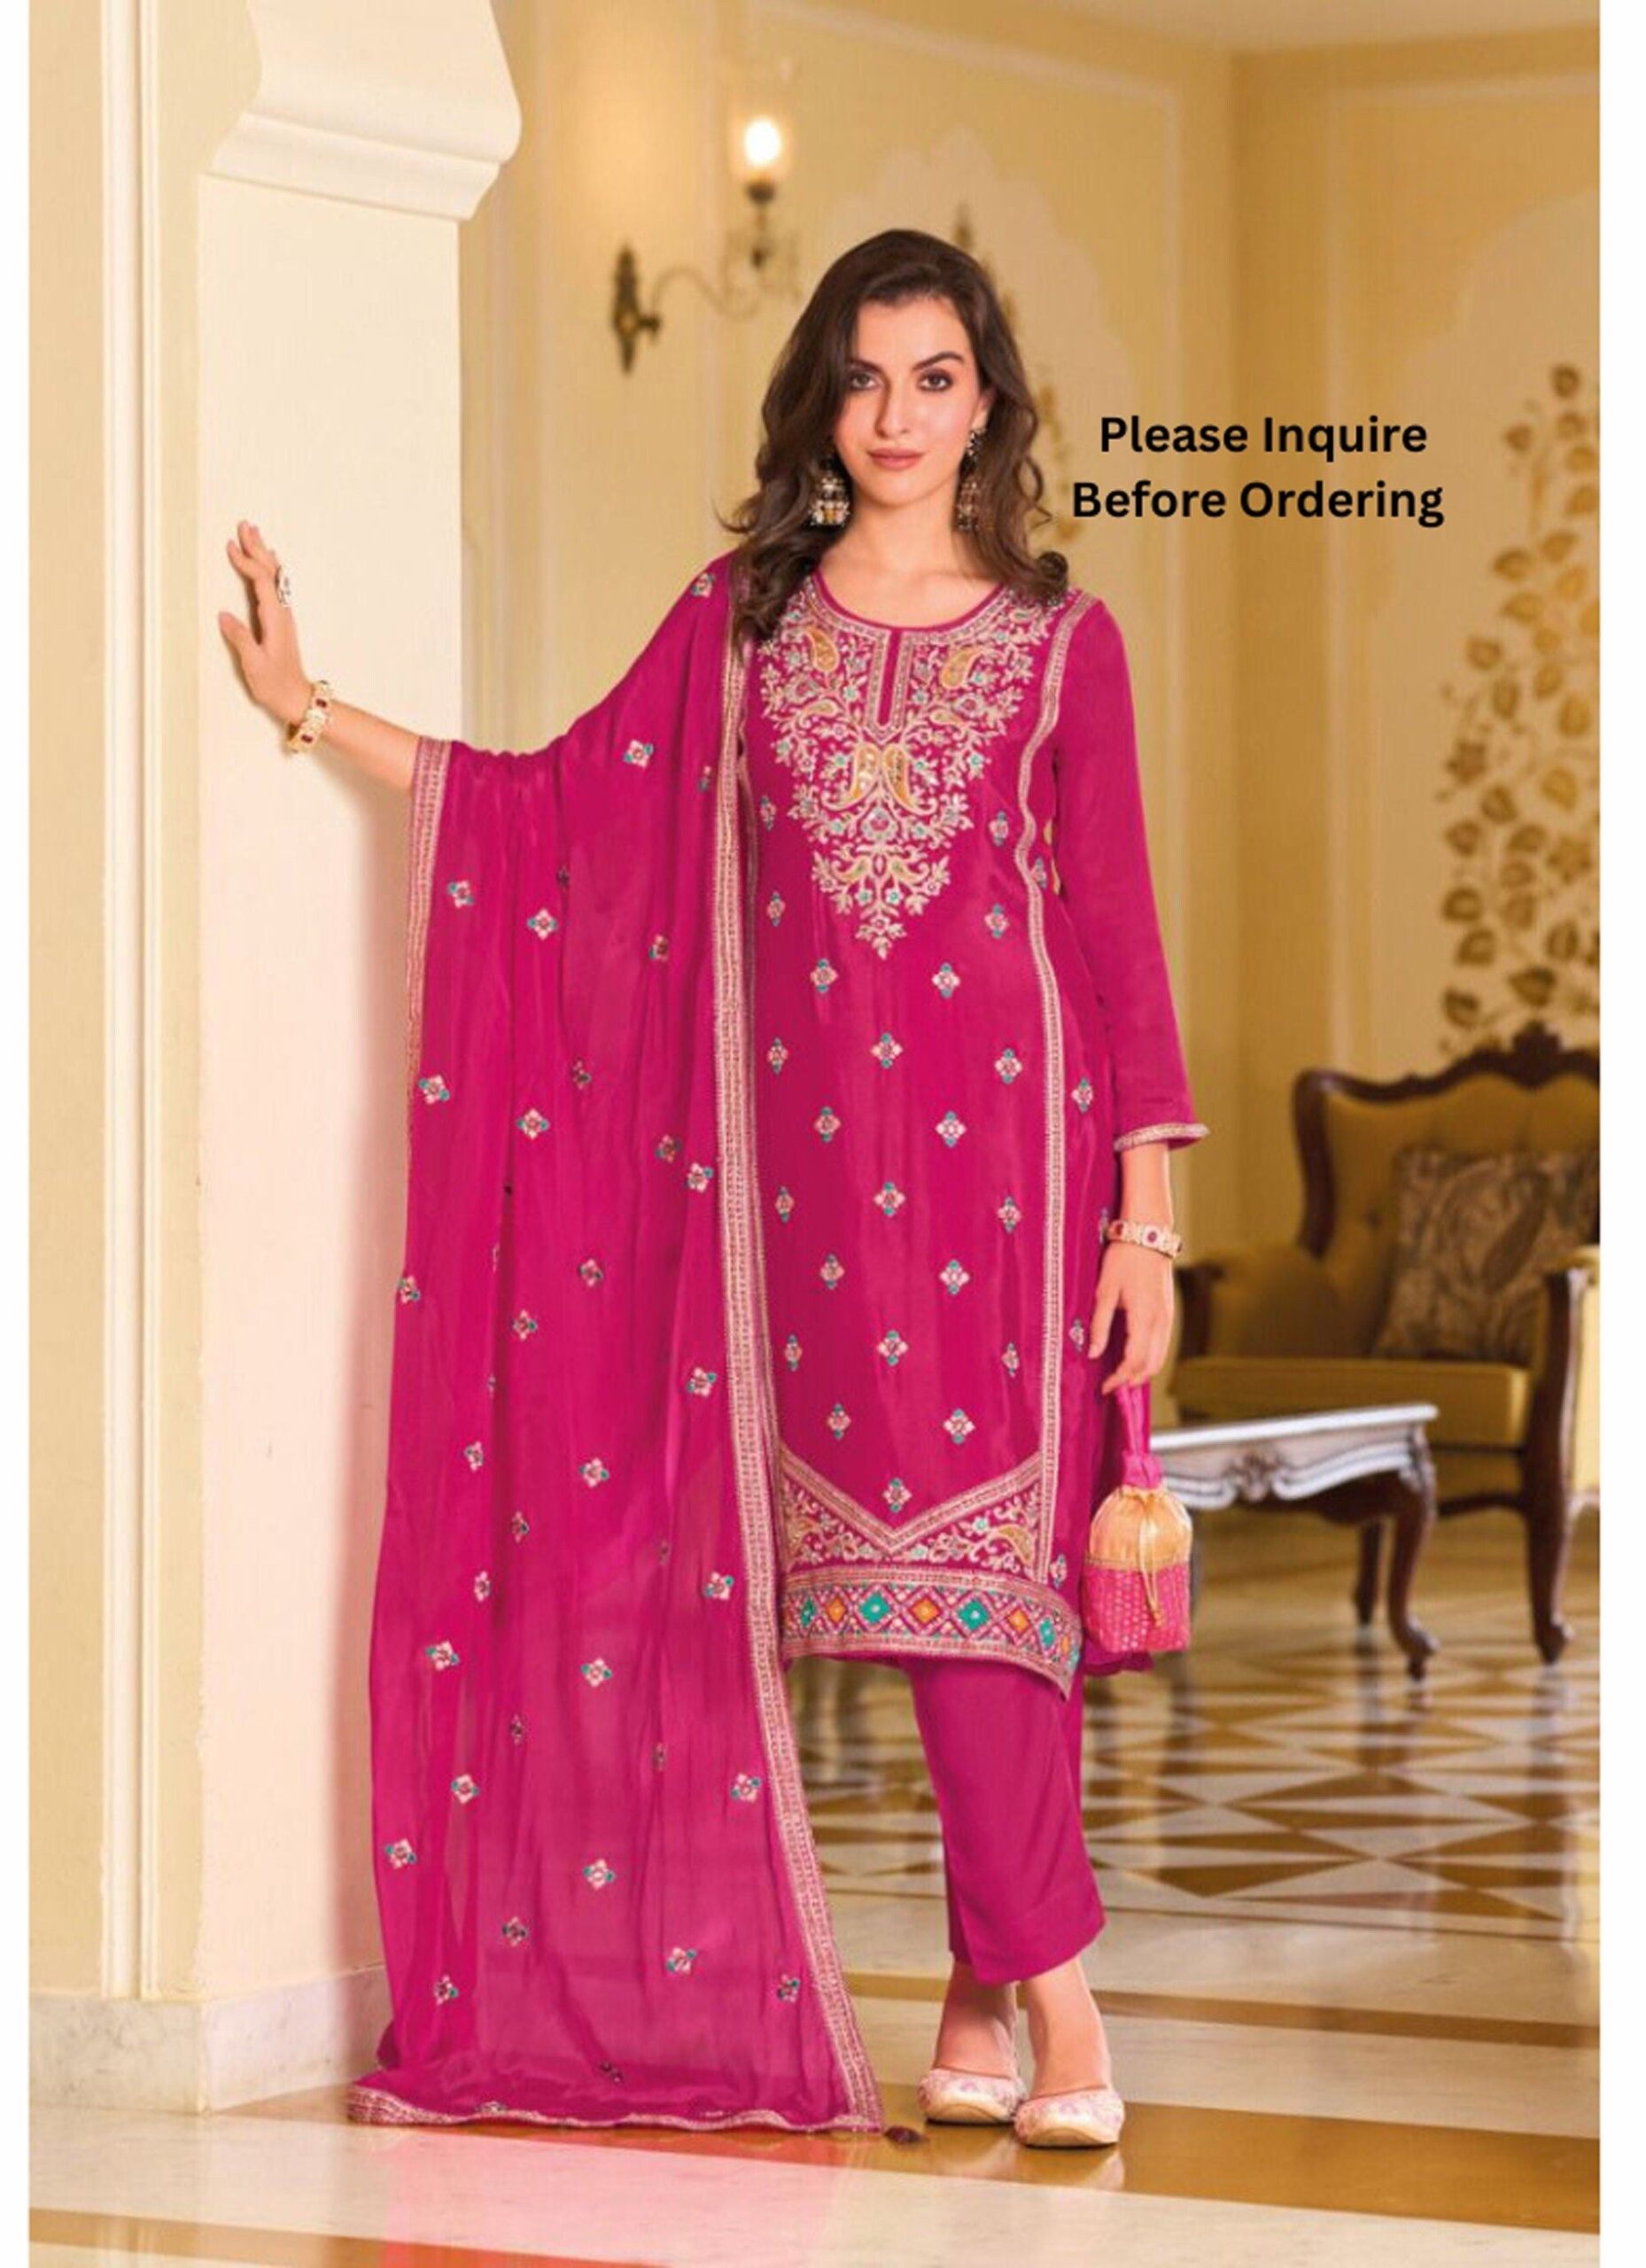 Tailored Elegance: Stitched Salwar Suits for Effortless Style